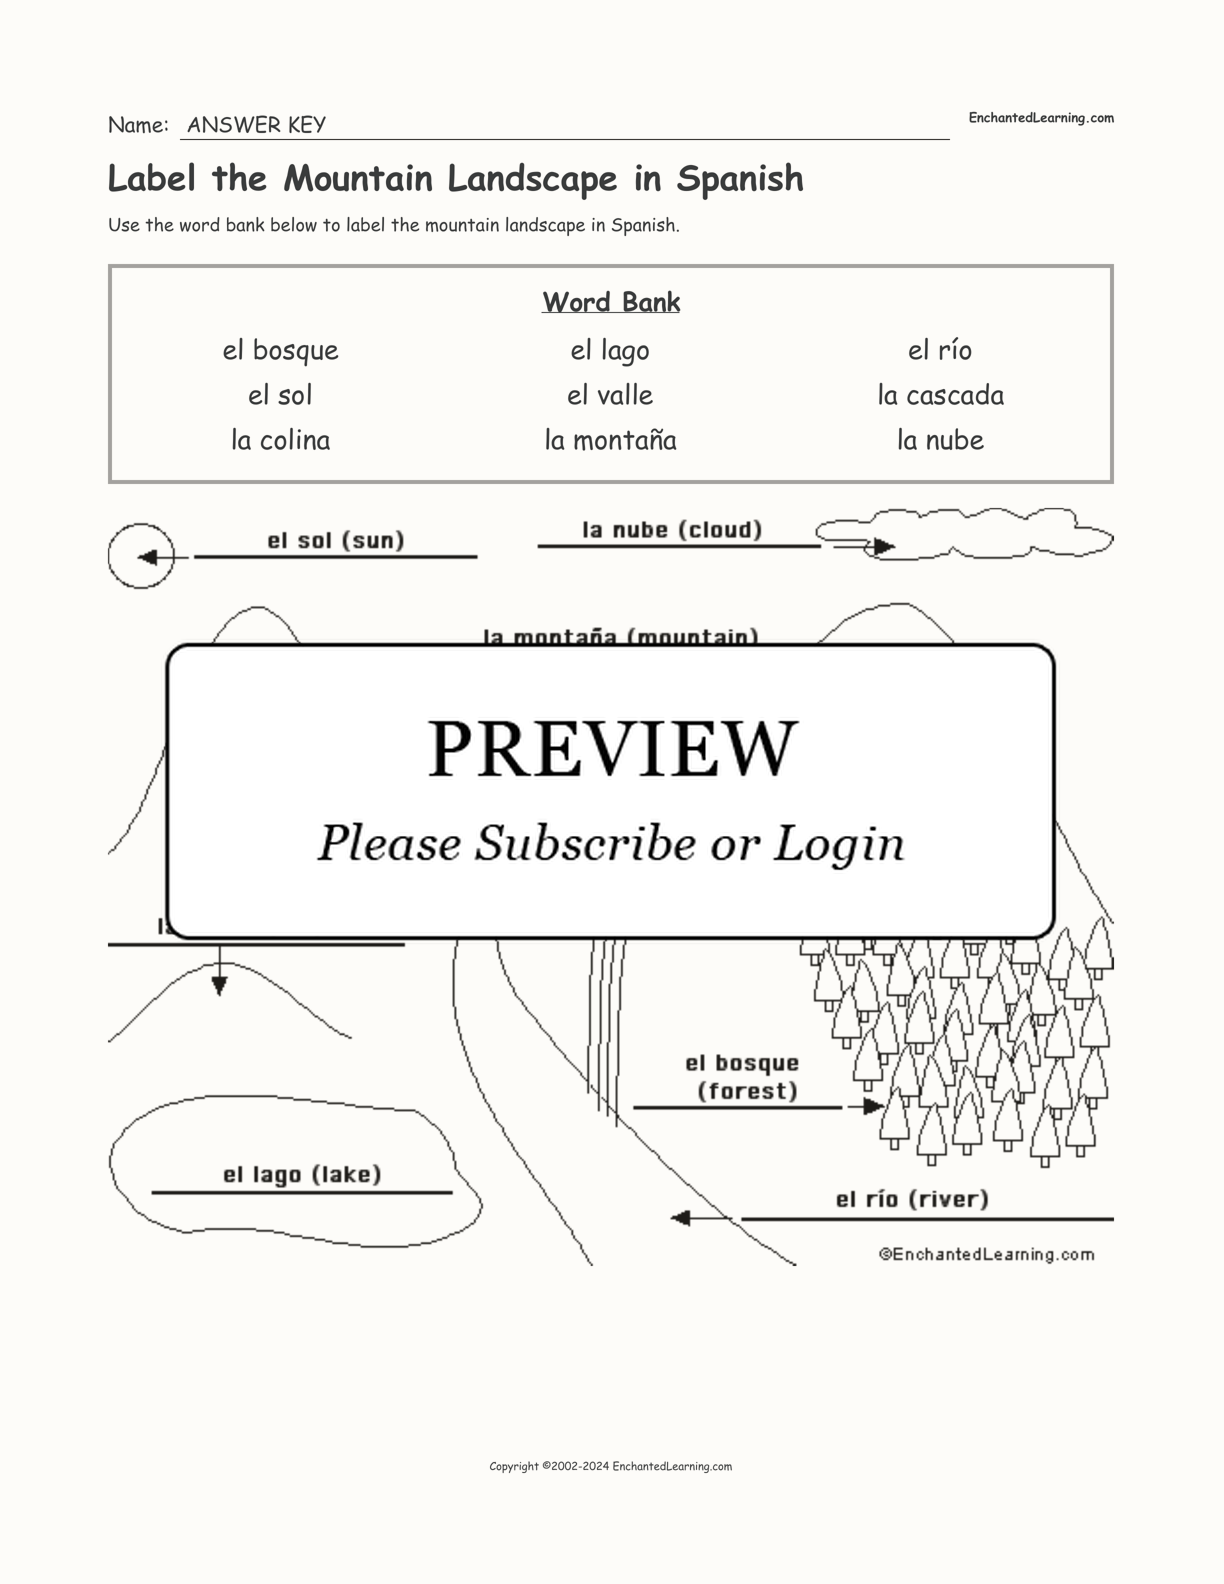 Label the Mountain Landscape in Spanish interactive worksheet page 2